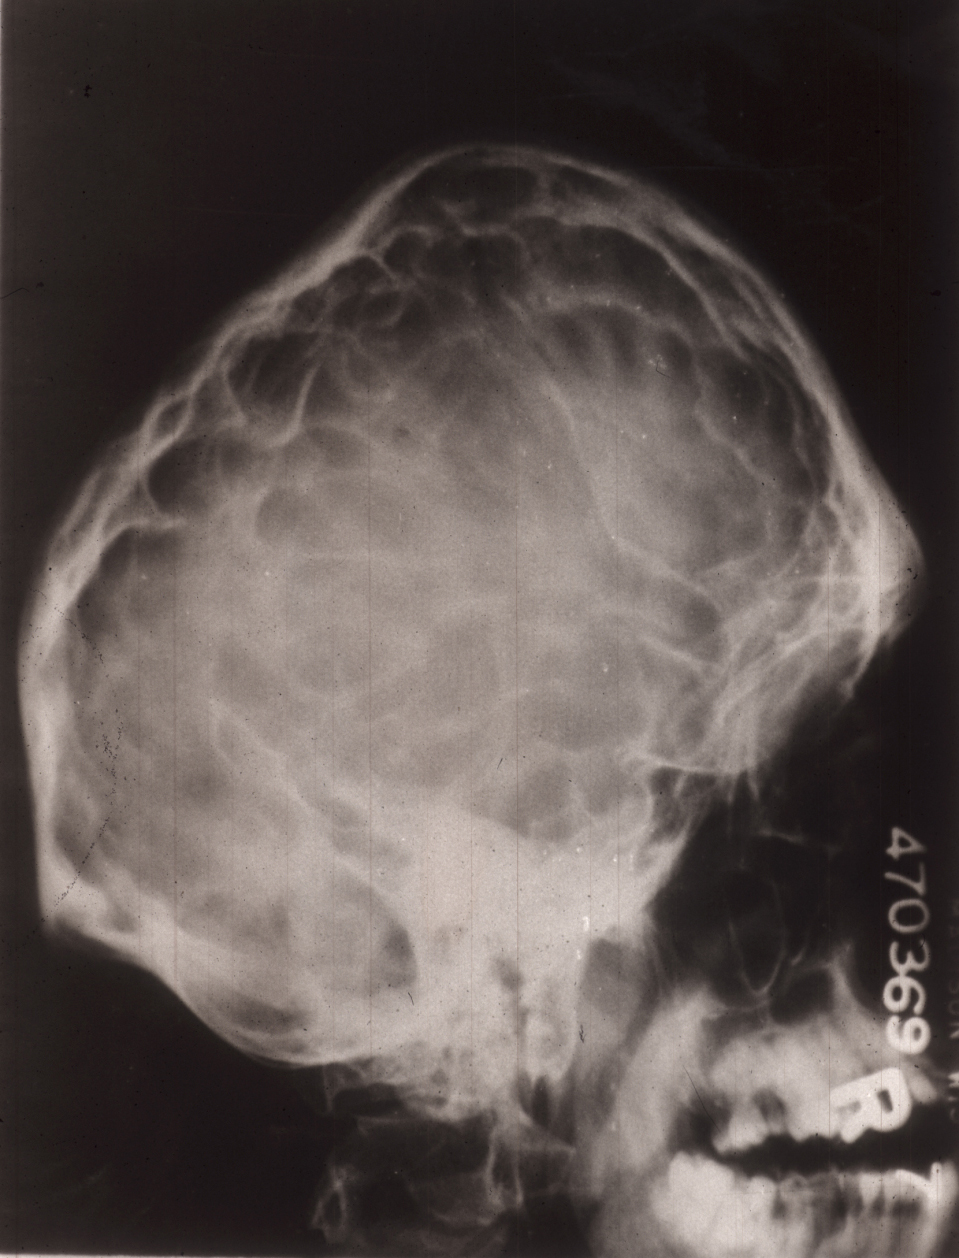 Skull X-ray of adult with Crouzon Syndrome